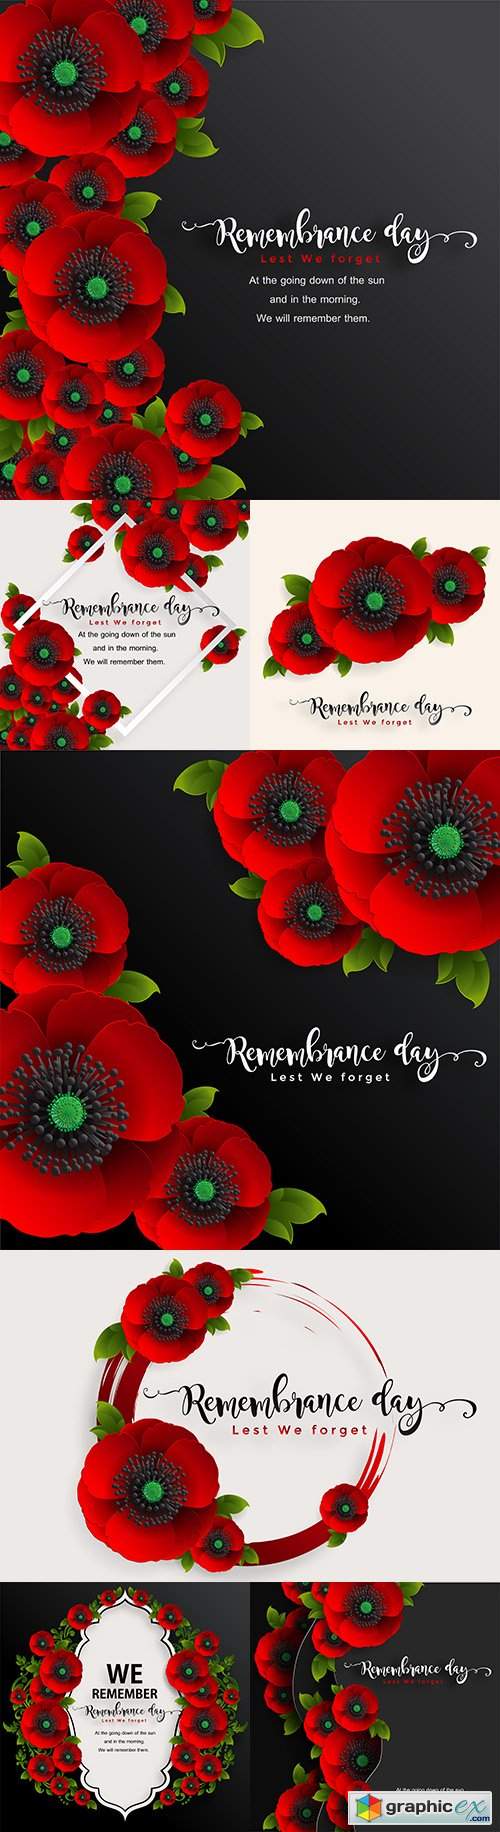  Memorial Day realistic red poppy flower decorative design 